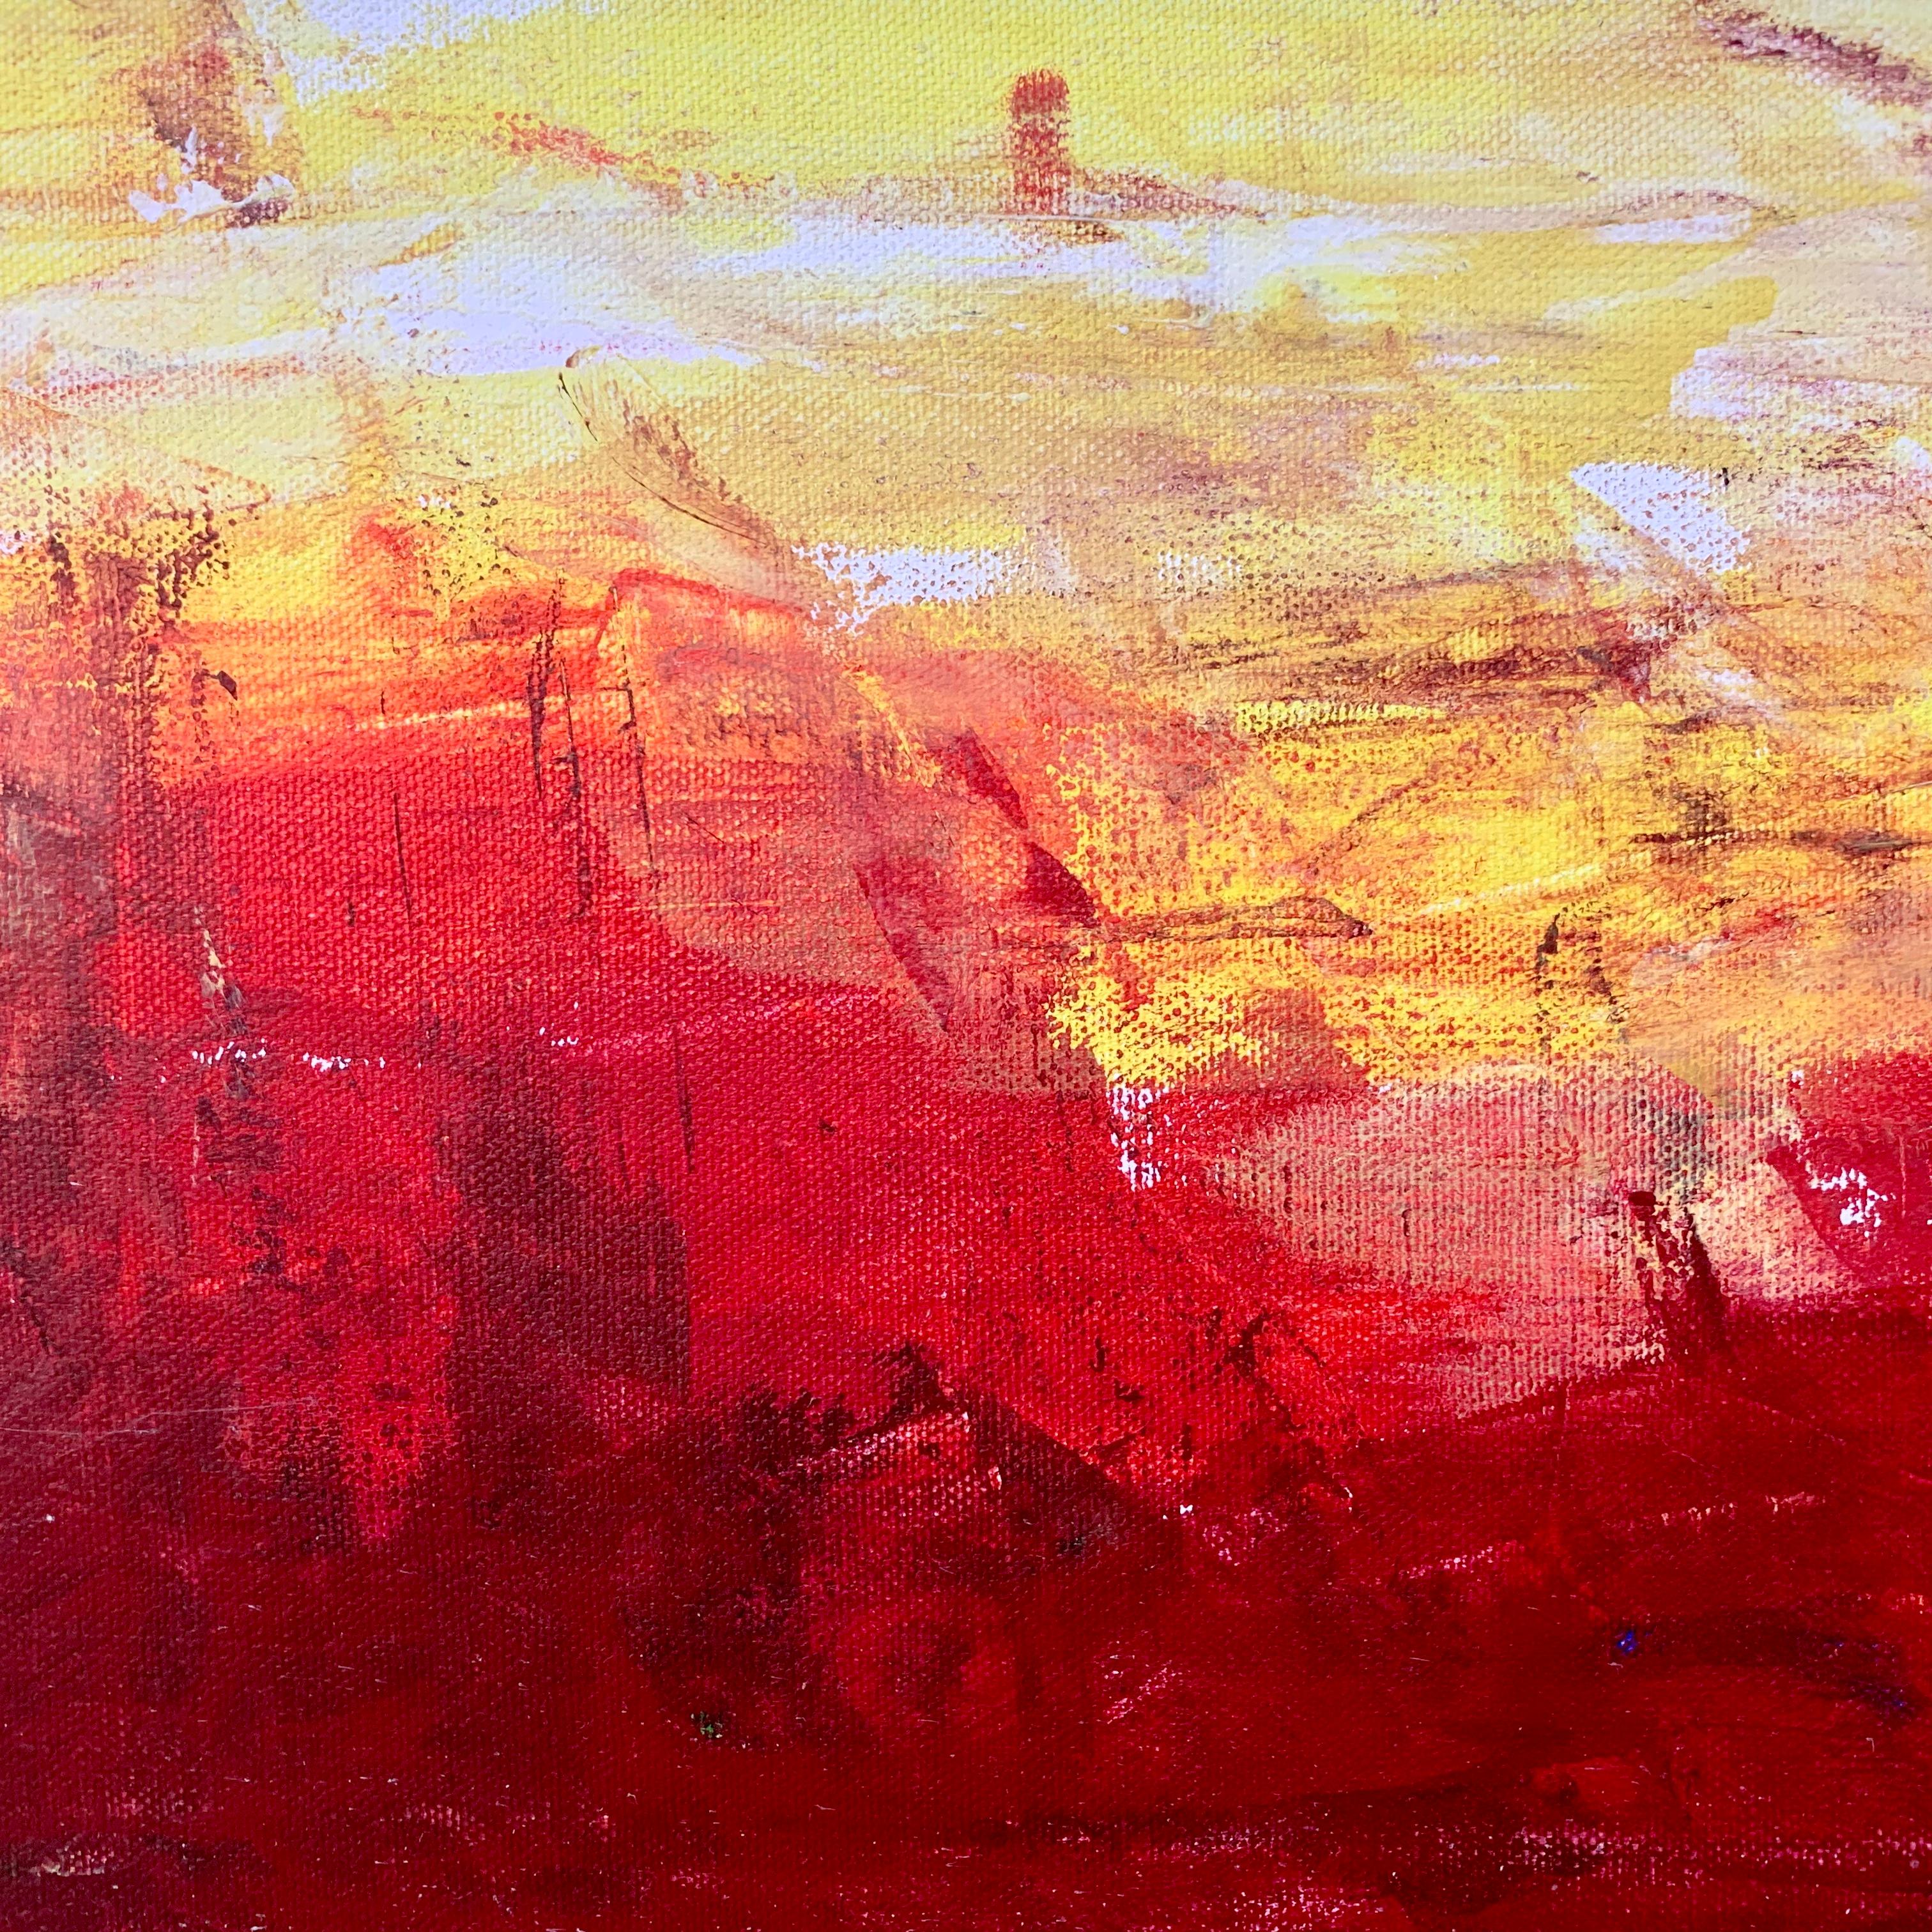 Red & Yellow Abstract Expressionist Landscape Painting by British Urban Artist For Sale 4